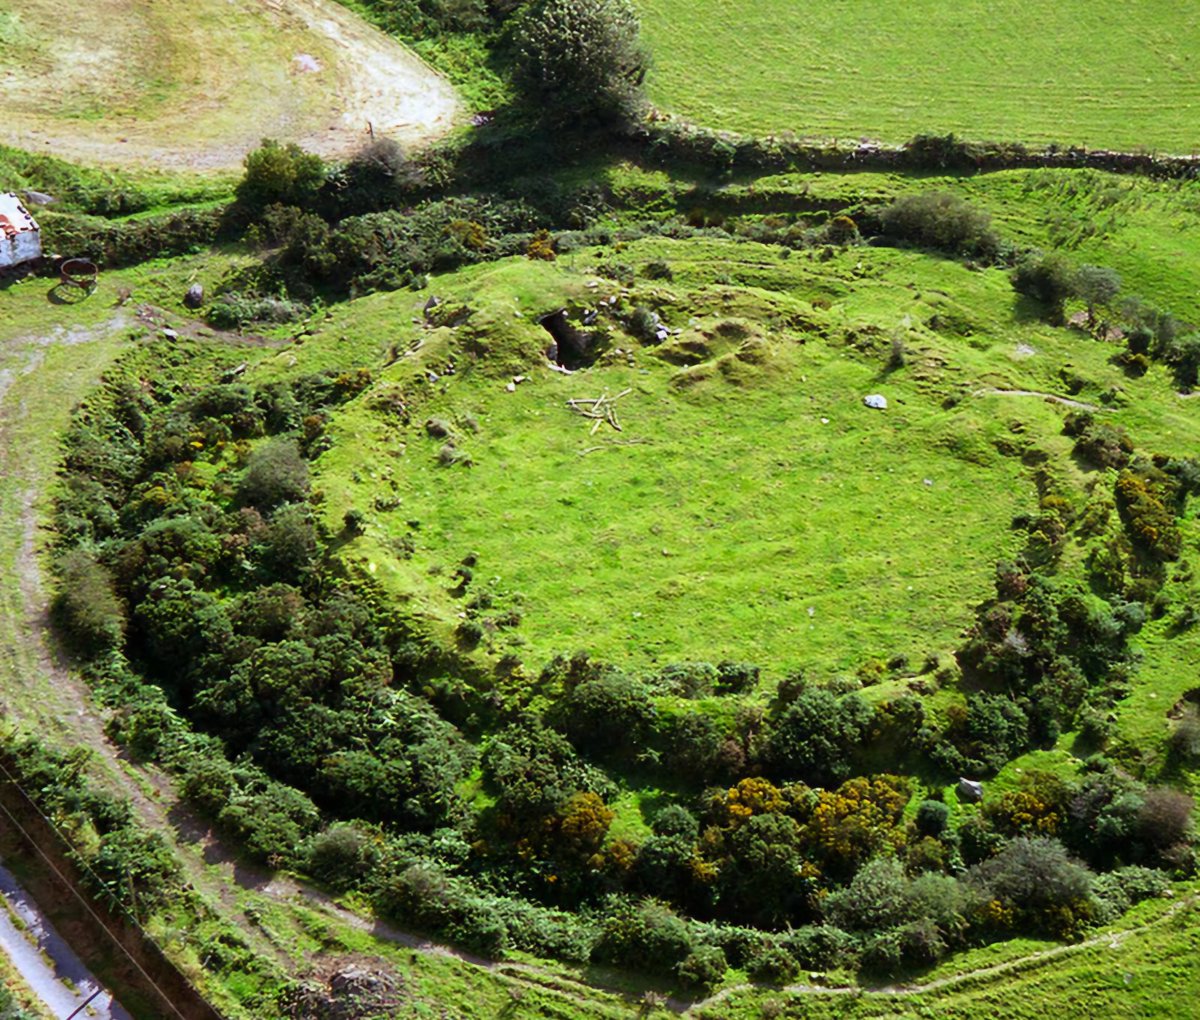 The Fairy Fort. One rule here, 'you can look, but you better not touch.' It is considered very unlucky to remove anything from a Fairy Fort. #Ireland ##FolkloreSunday